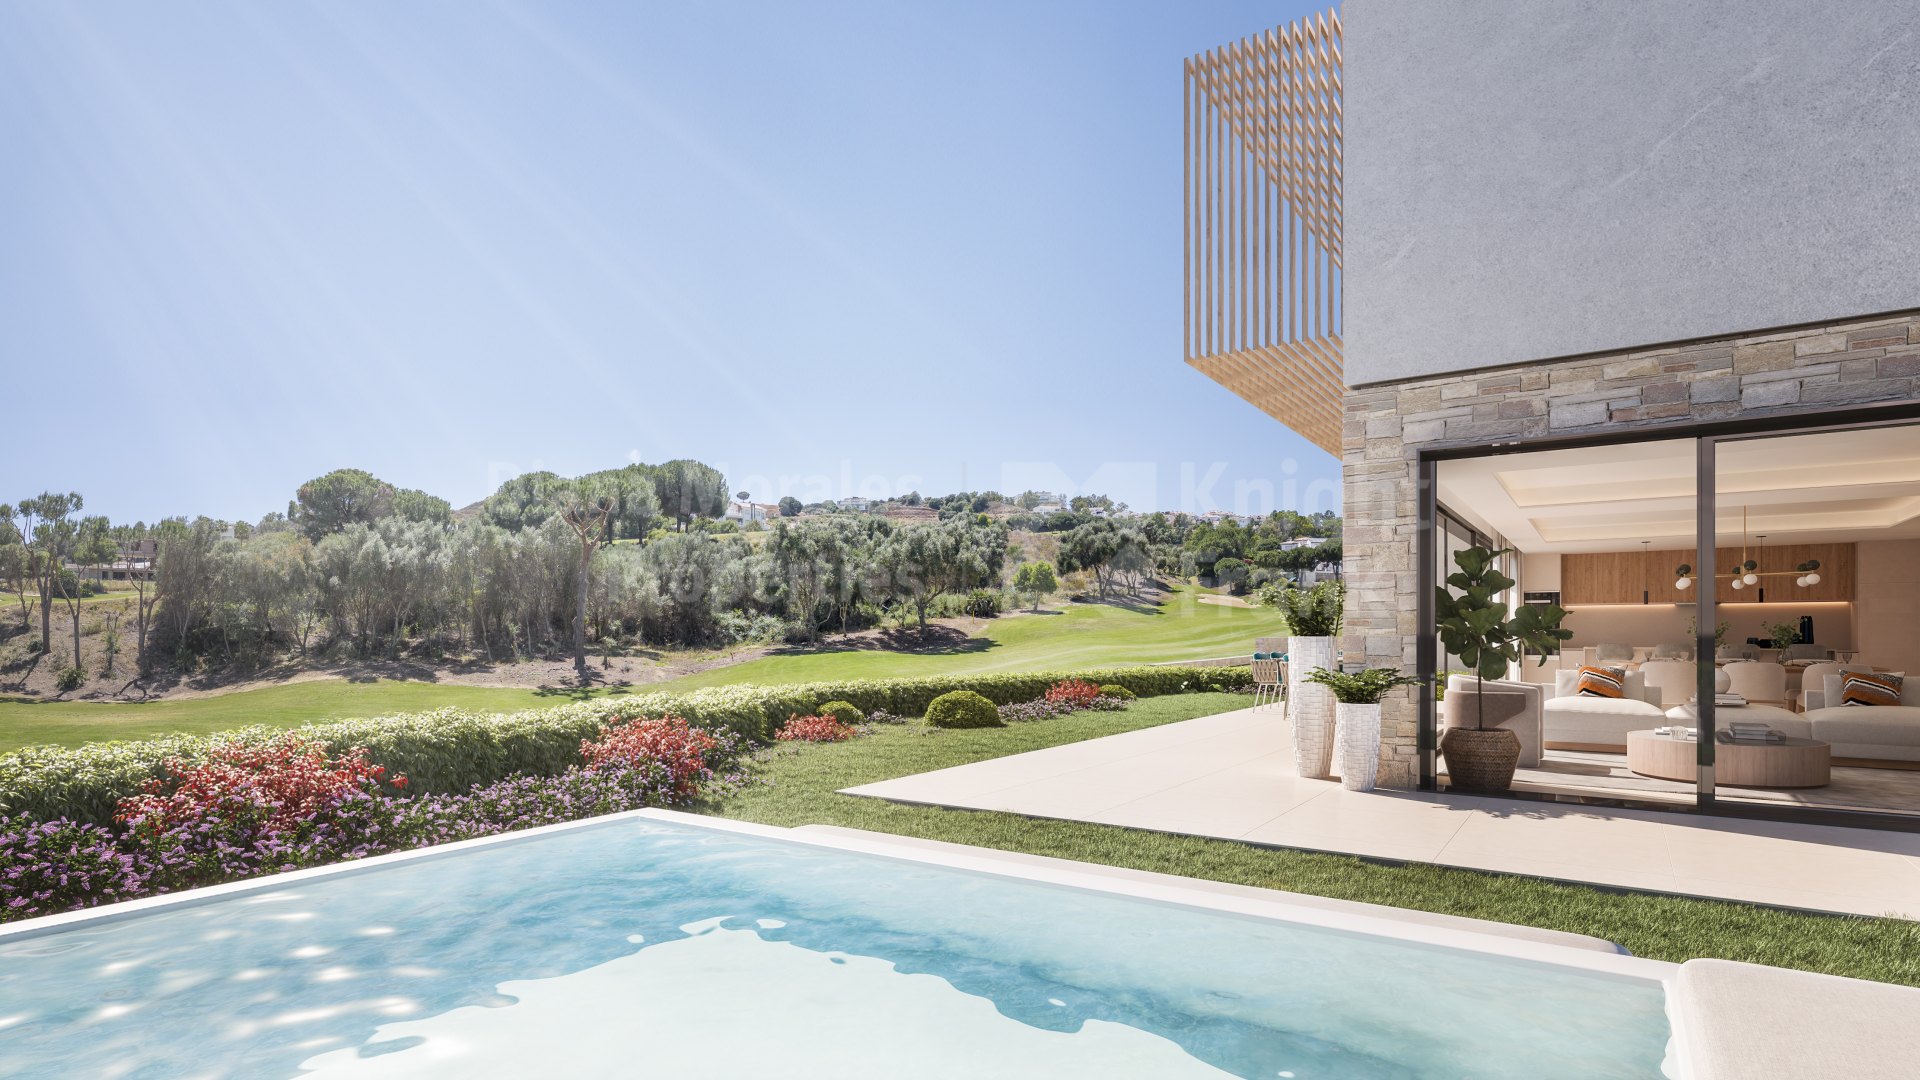 Cala de Mijas, New contemporary townhouse in front of the golf course